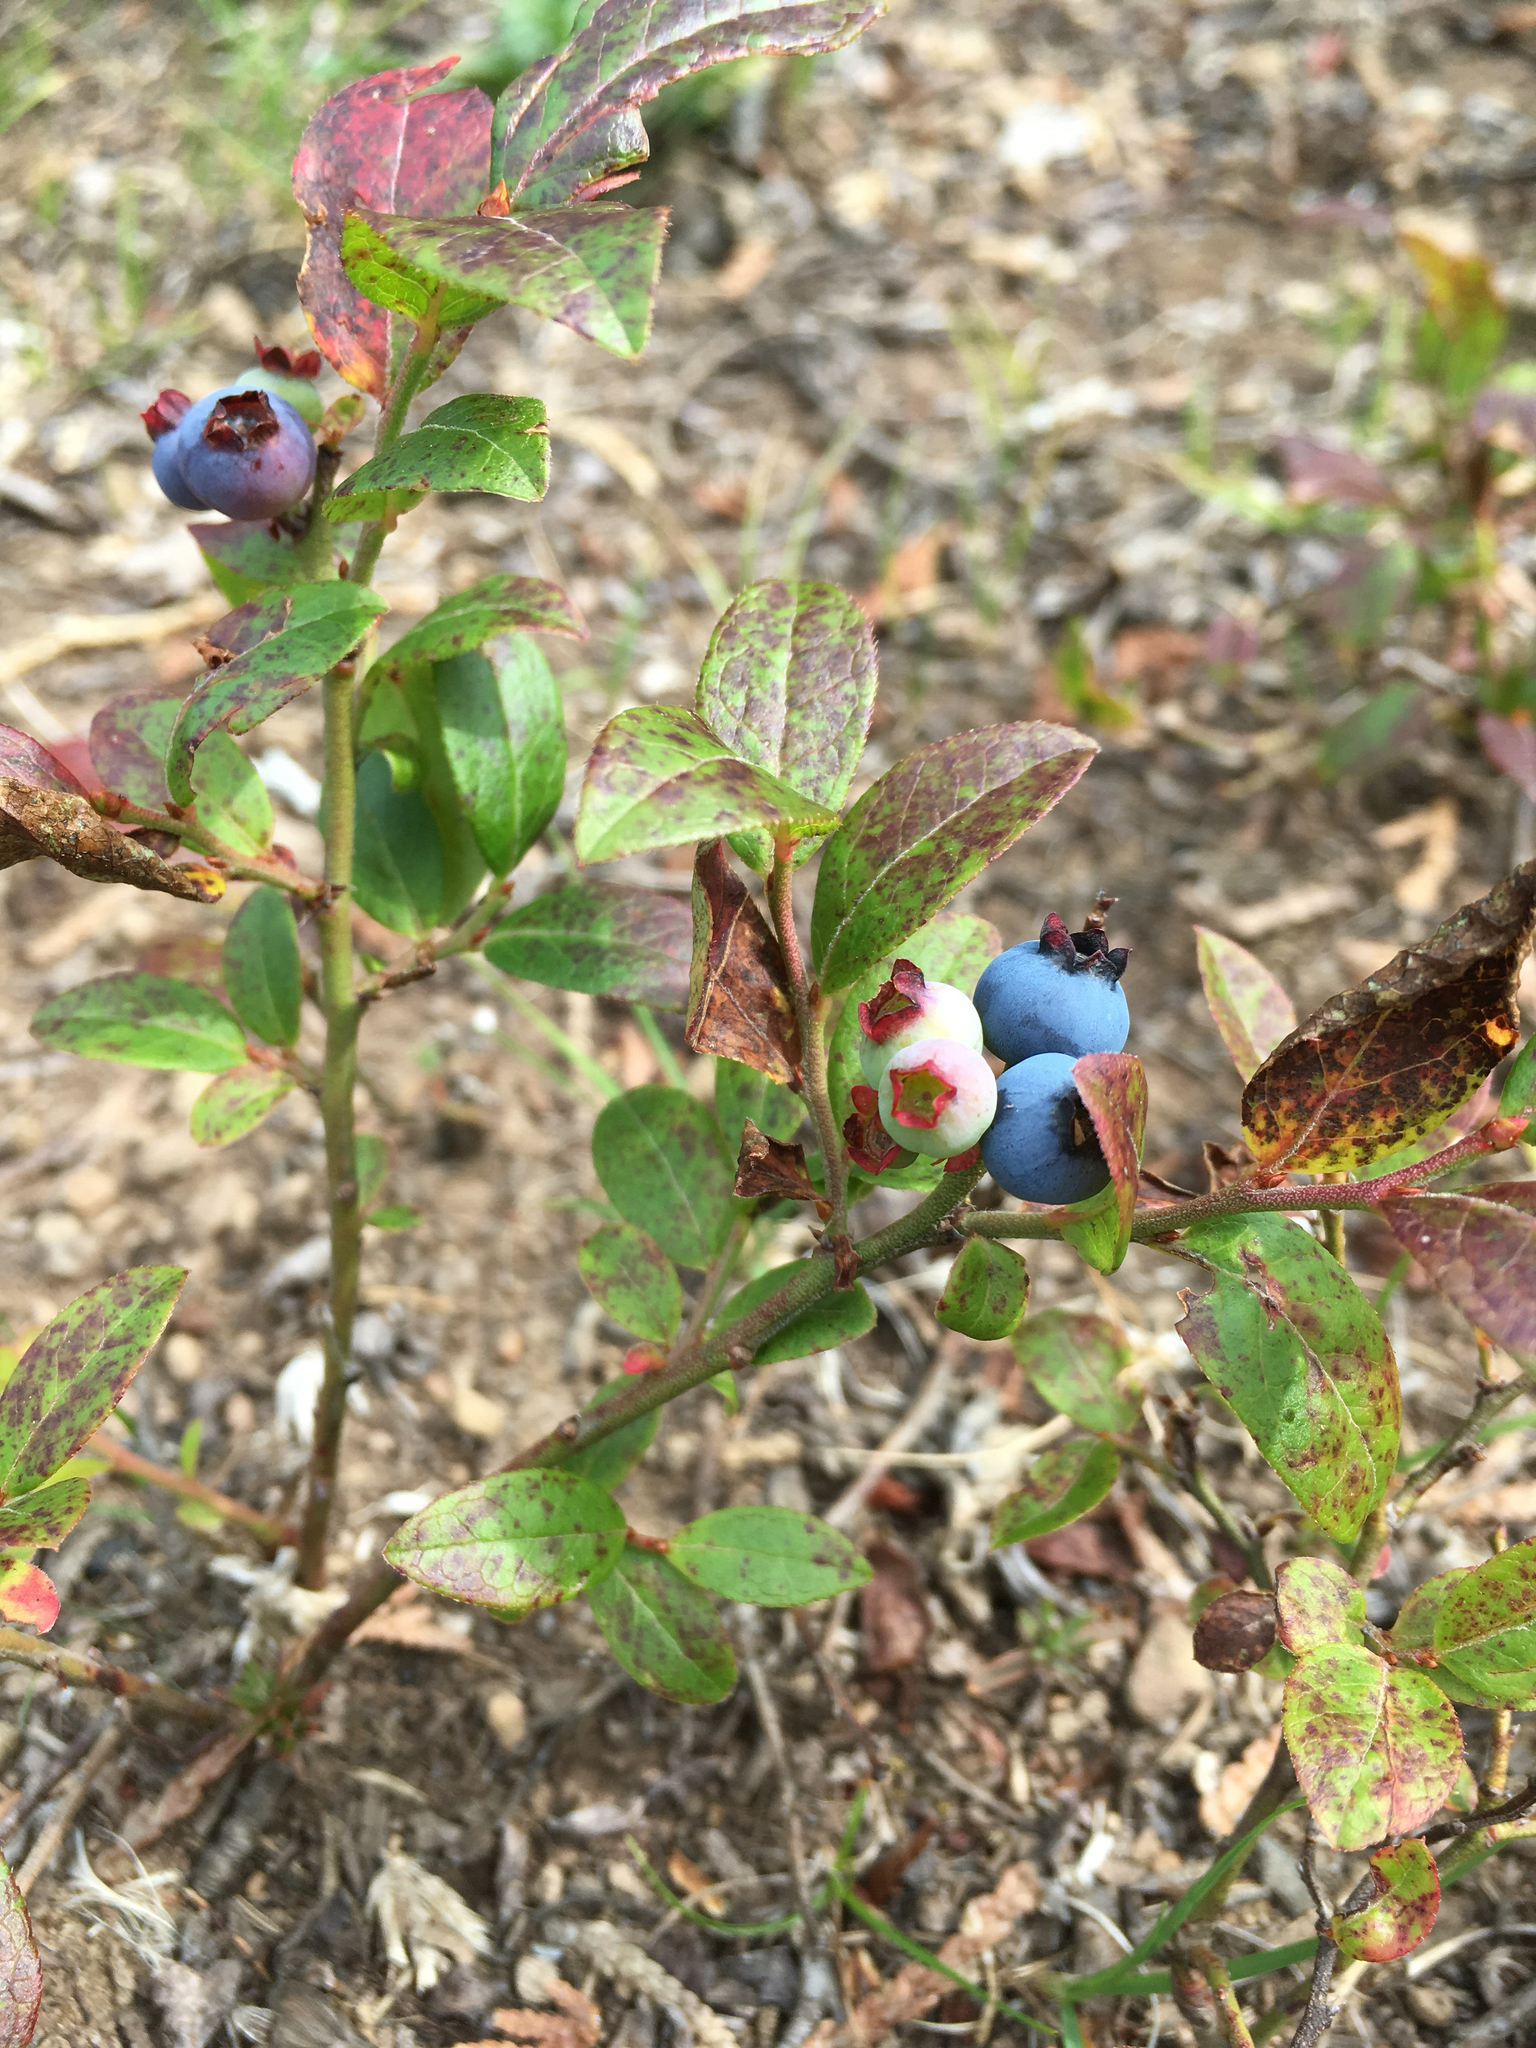 Lowbush blueberry plants have woody branches that are low-to-the ground.